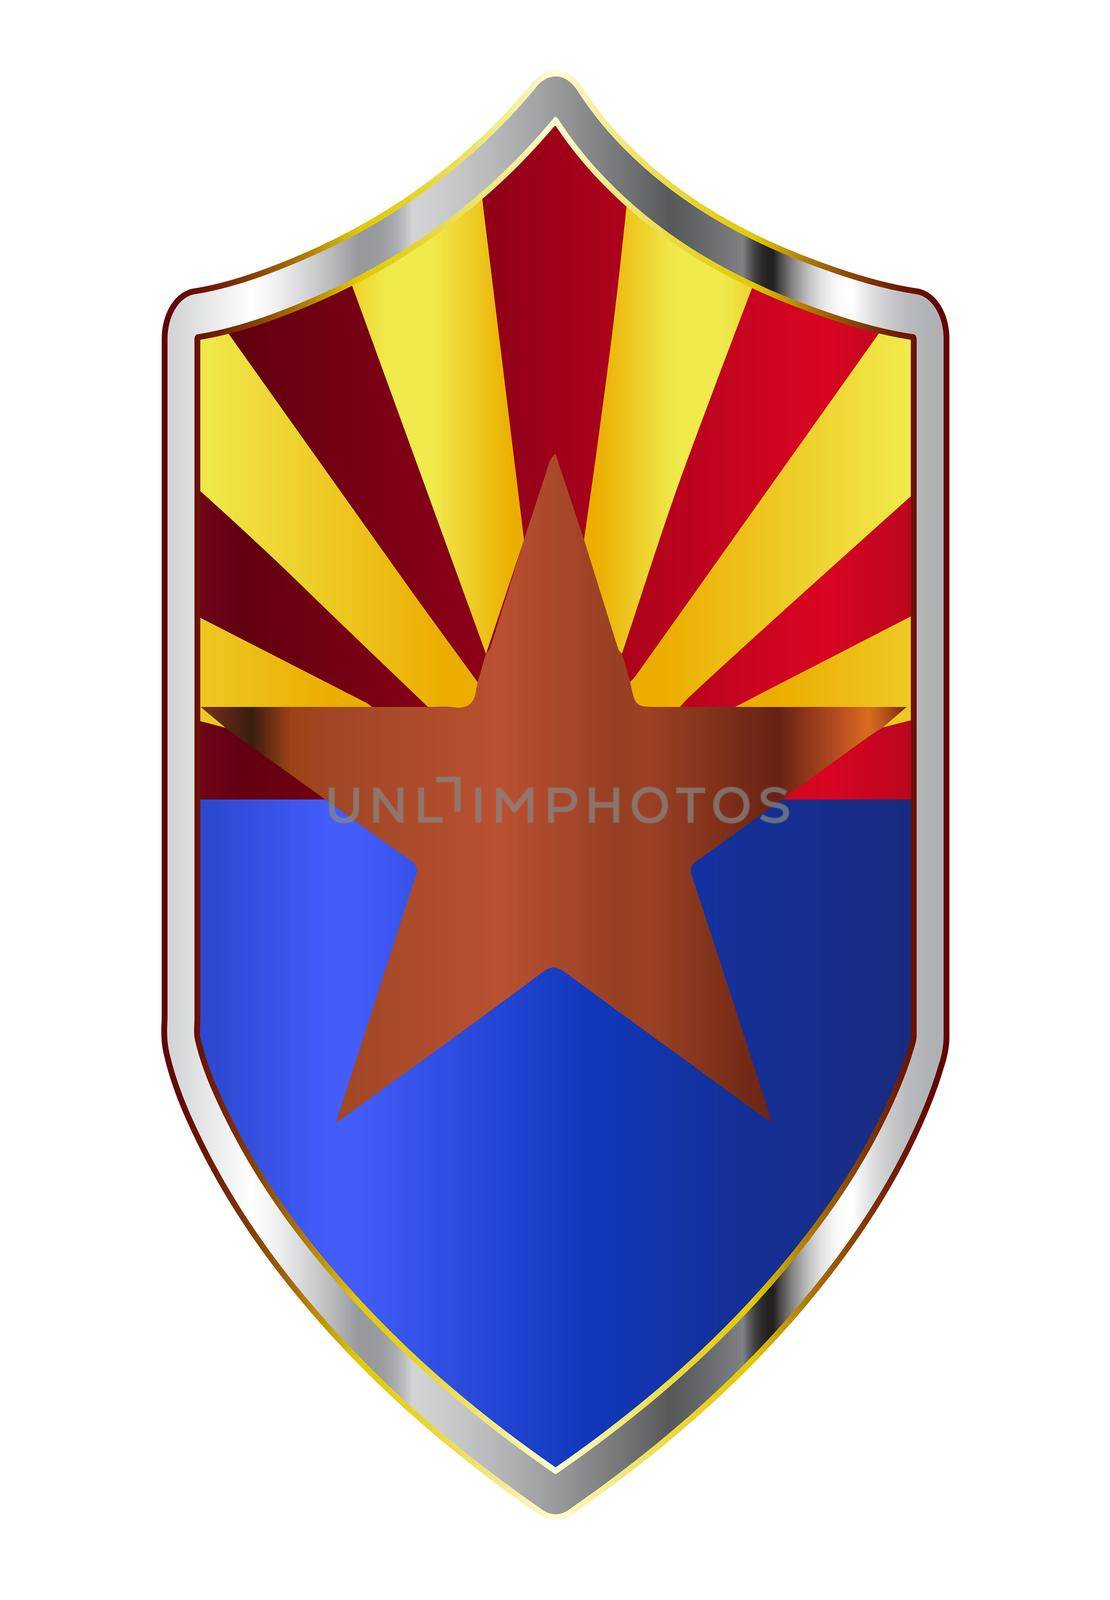 A typical crusader type shield with the state flag of Arizona all isolated on a white background